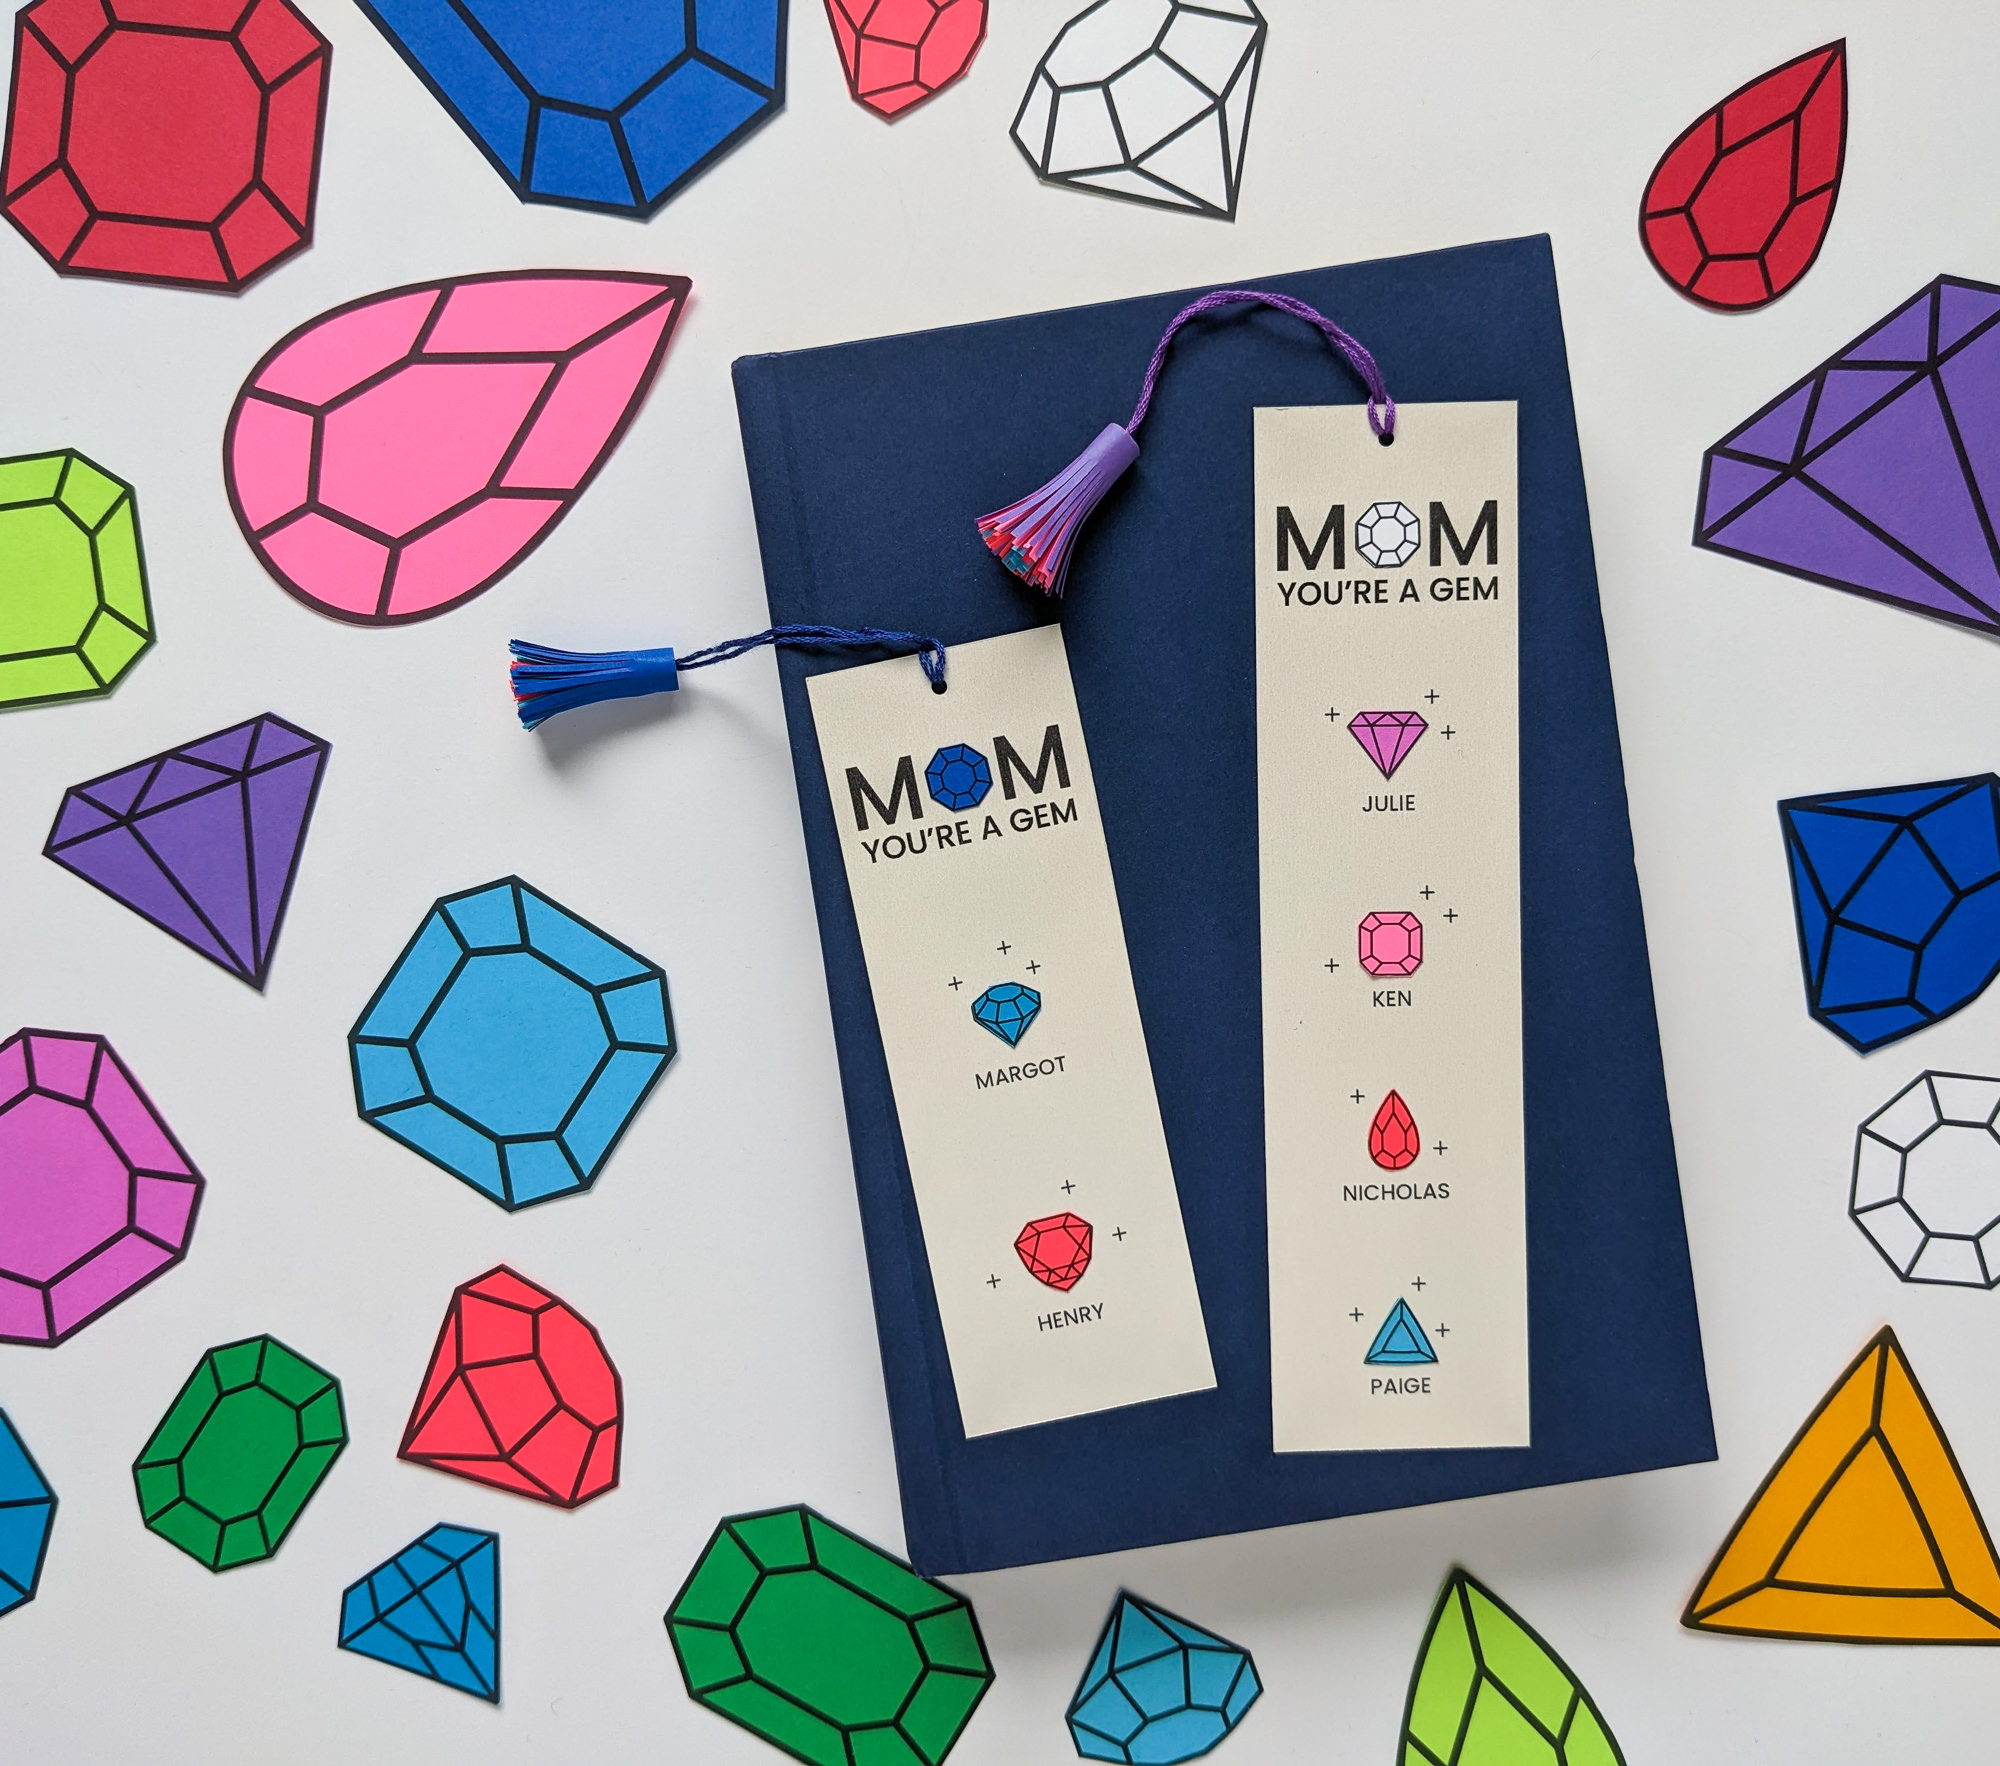 Two personalized handmade Mother's Day bookmarks featuring birthstone gems for family members